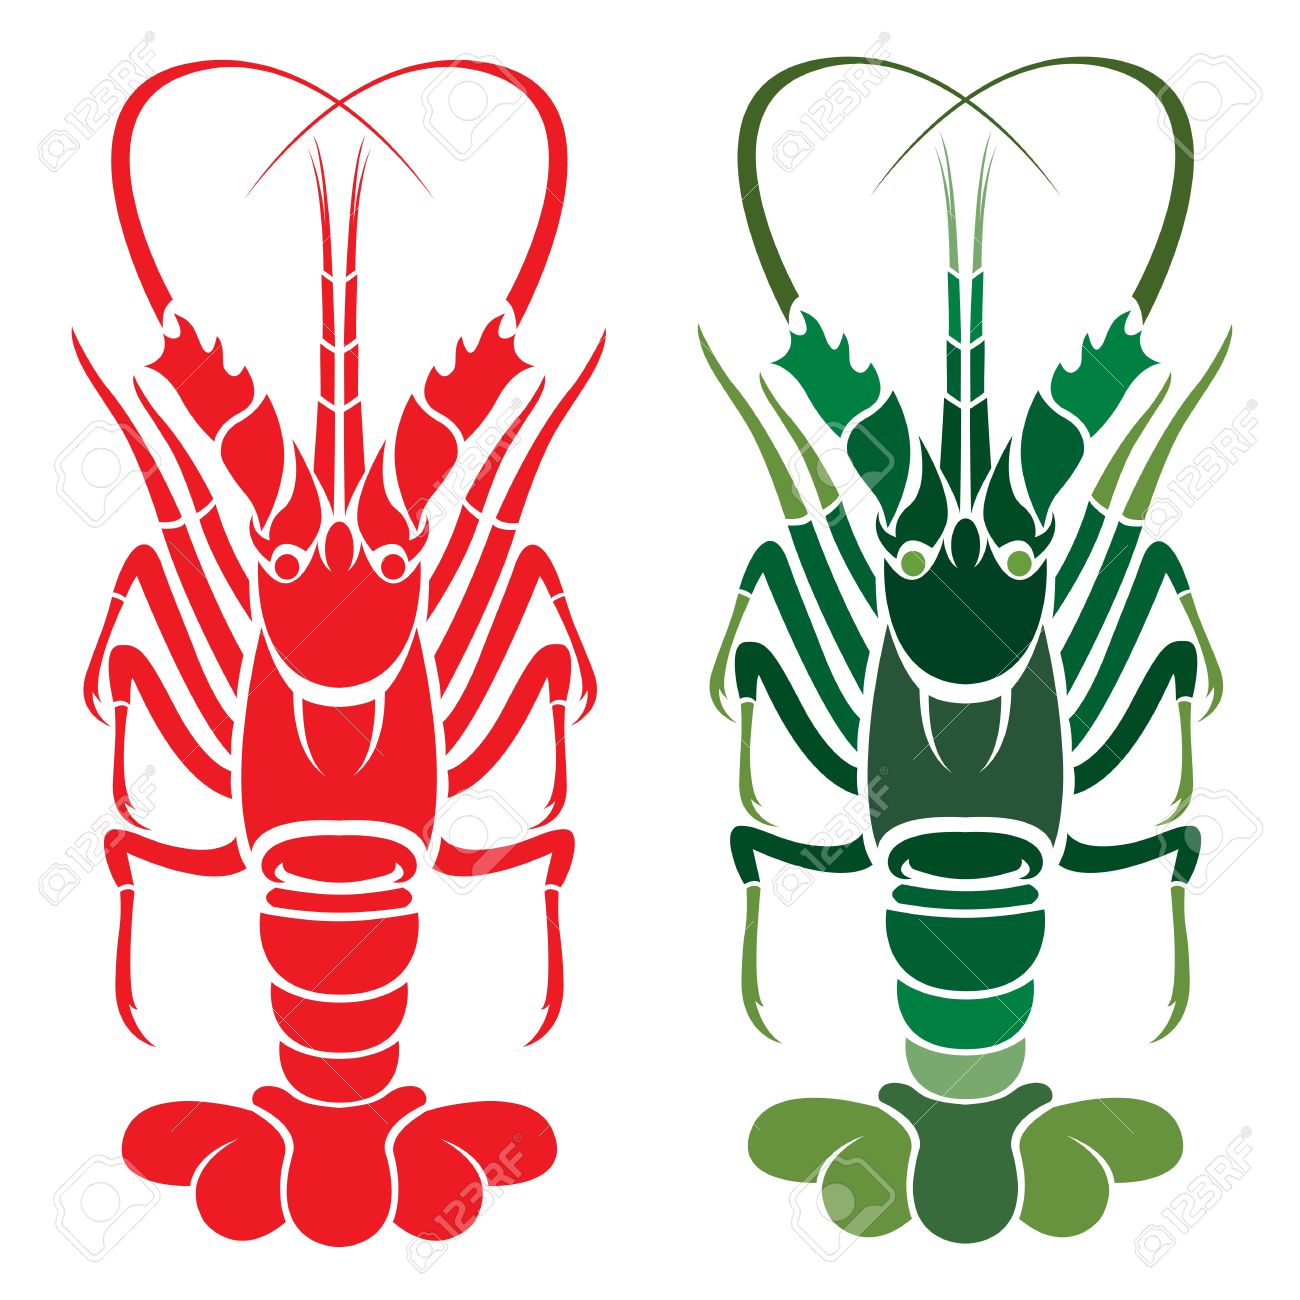 Spiny Lobster clipart #13, Download drawings